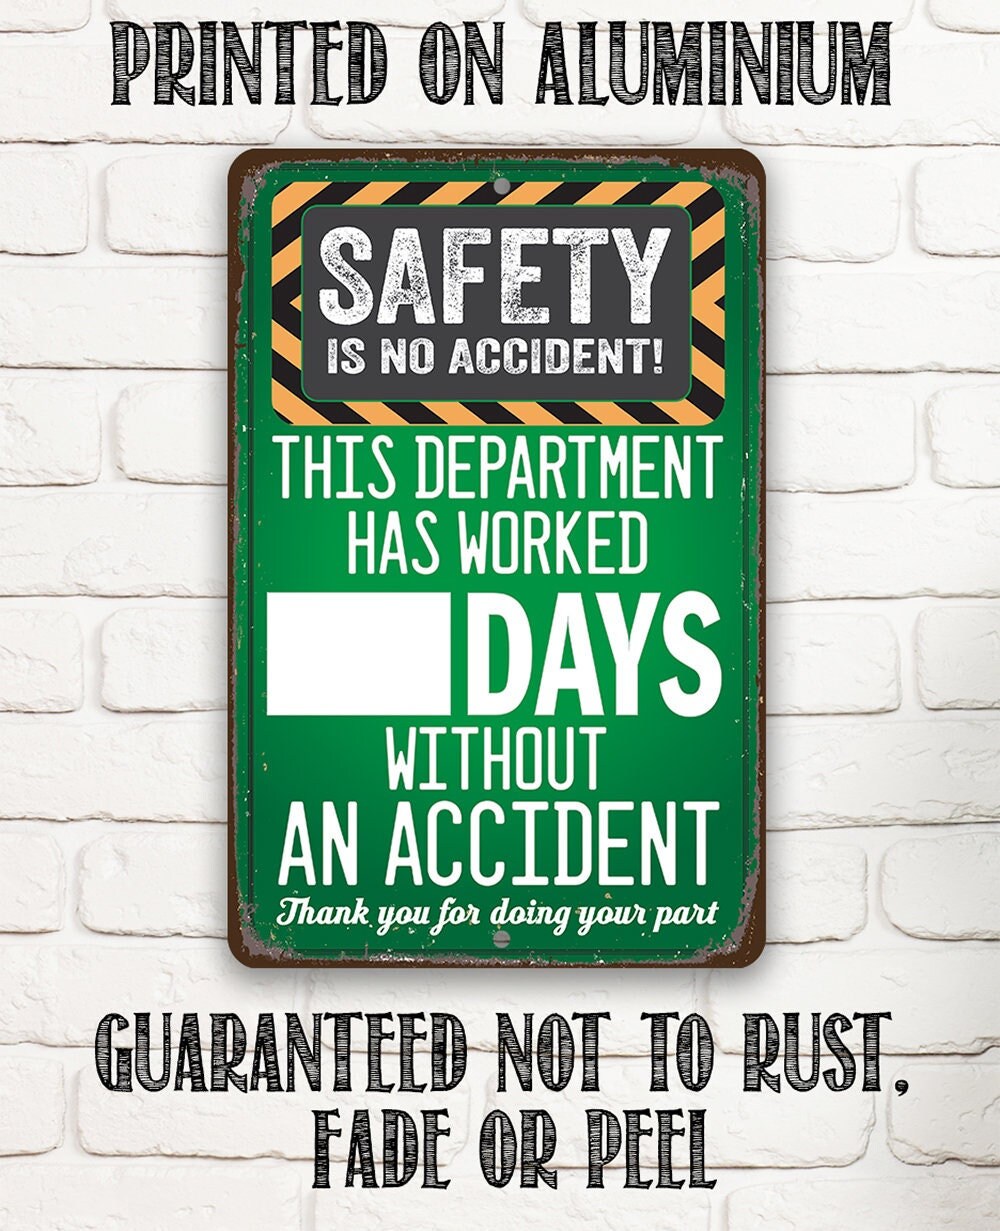 Safety Is No Accident! Caution and Warning Sign, Safety Signage for Office, 8" x 12" or 12" x 18" Aluminum Tin Awesome Metal Poster